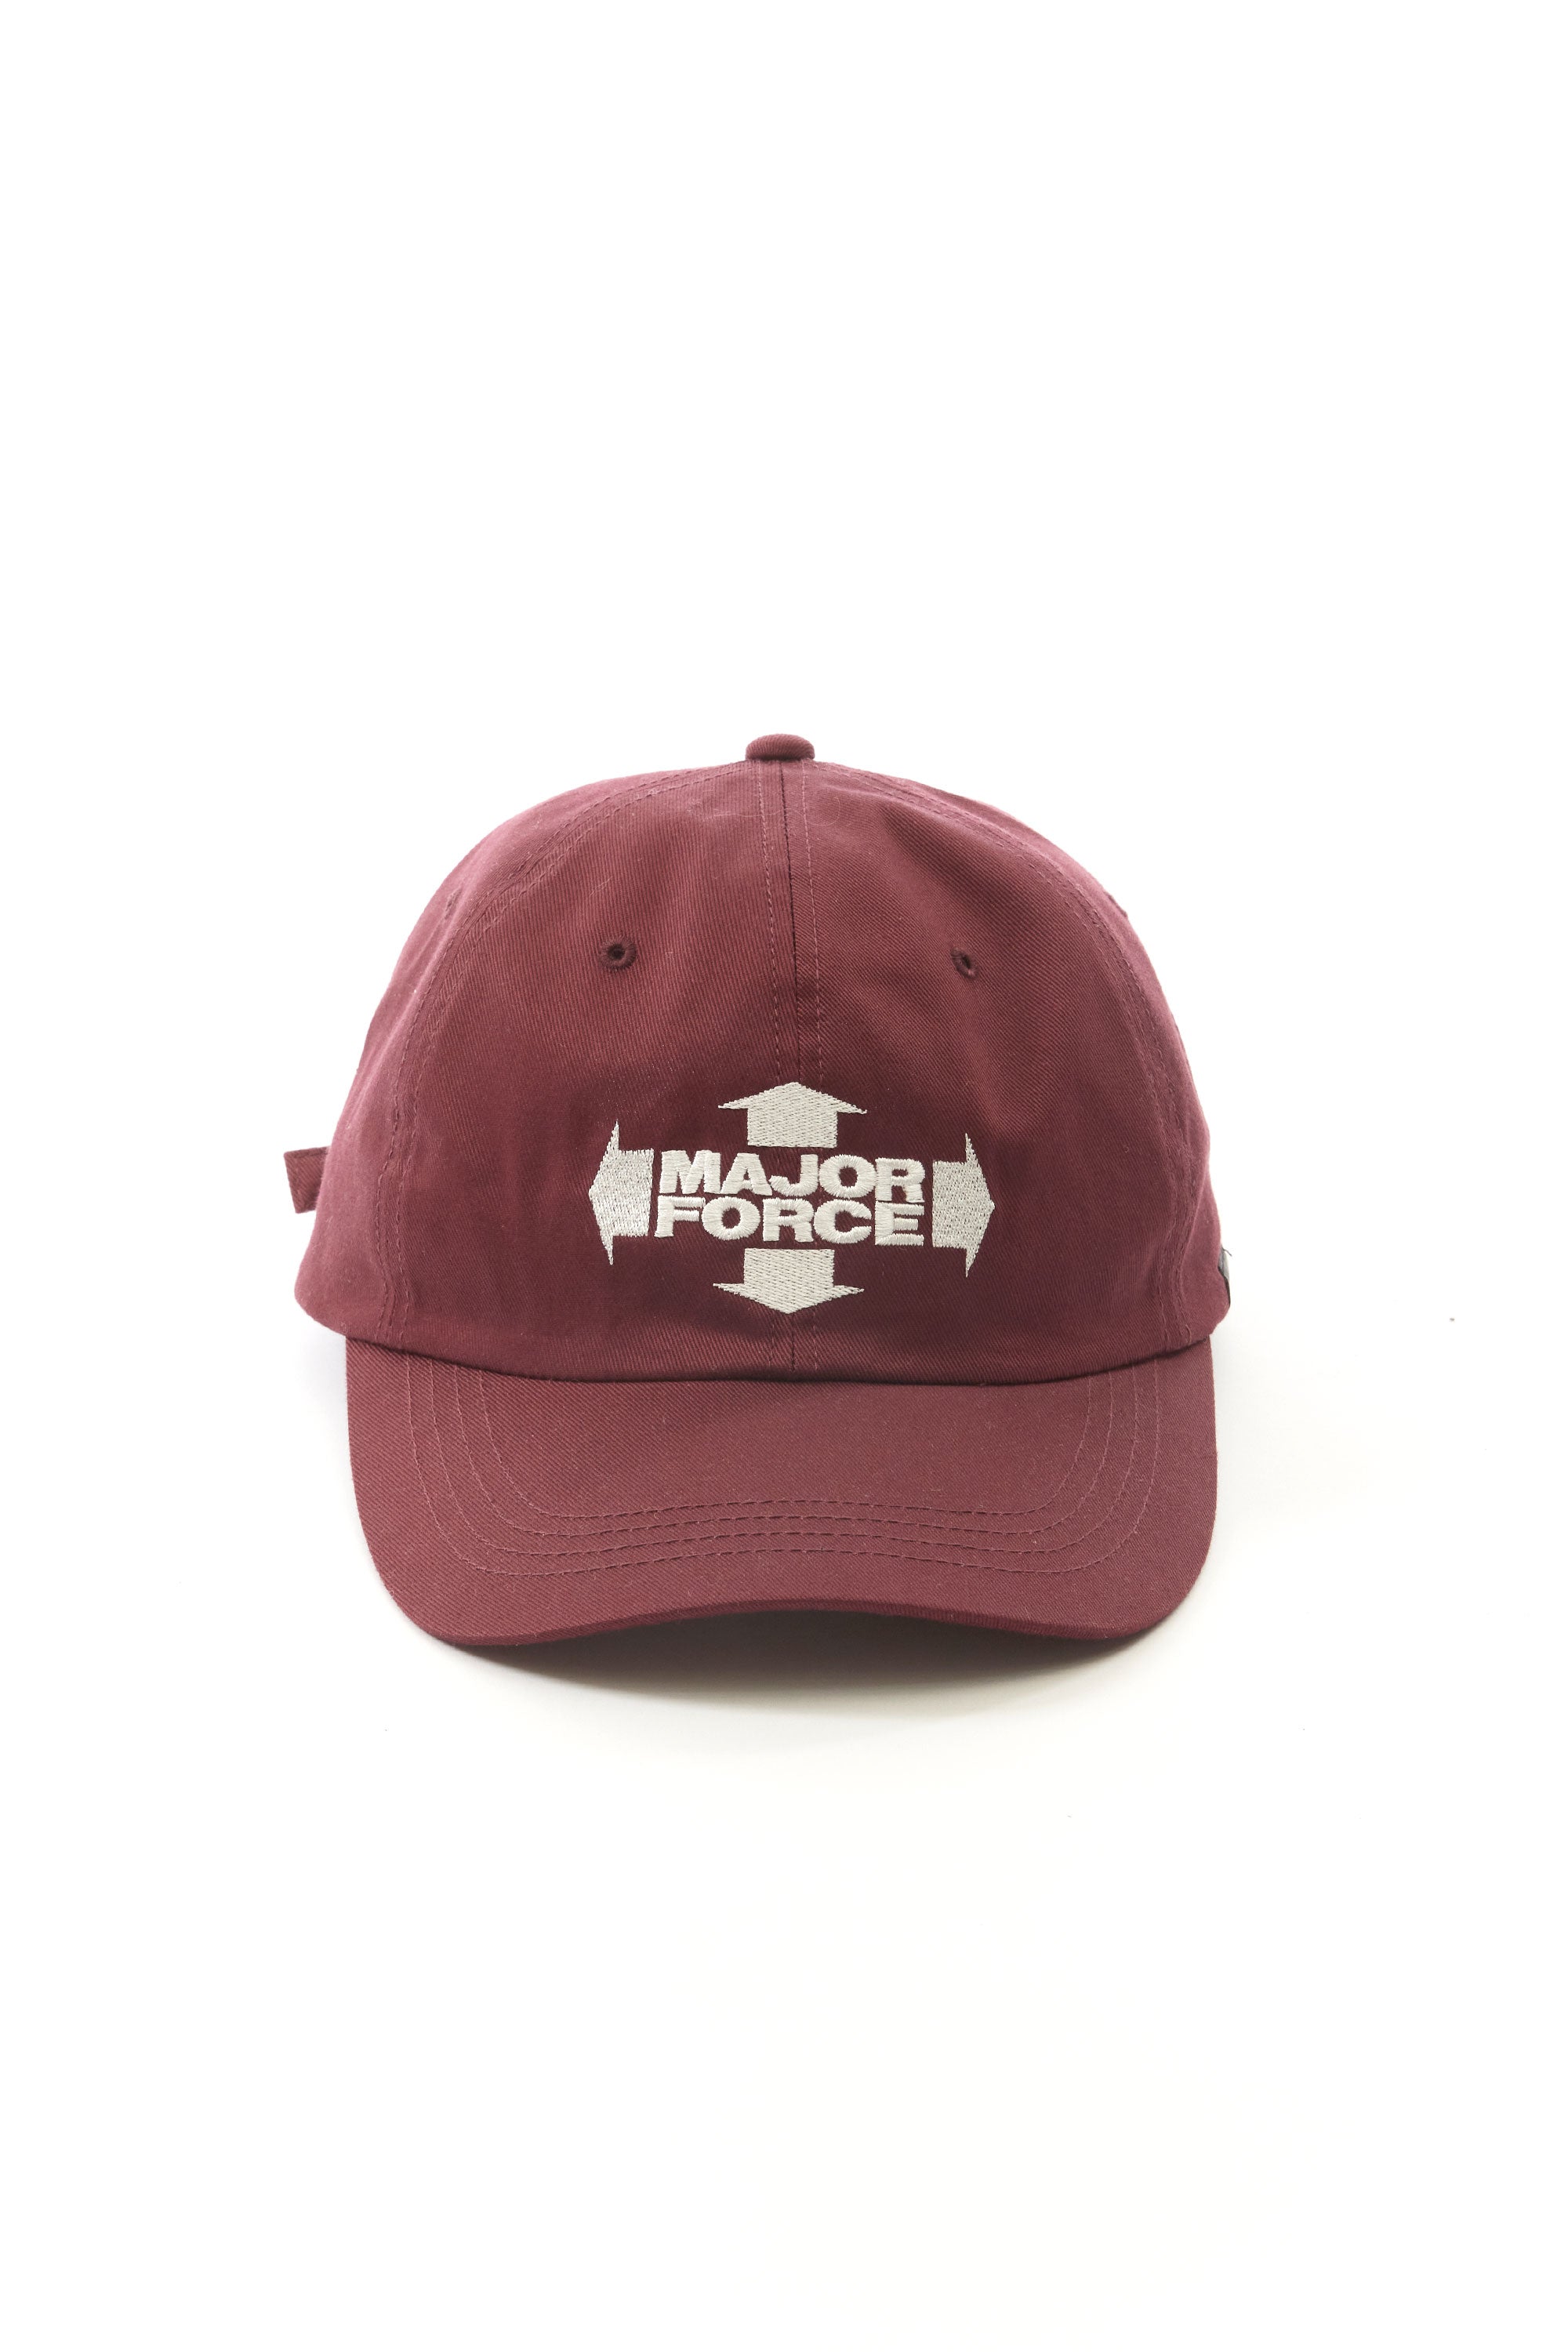 The NEIGHBORHOOD - NH x MAJOR FORCE DAD CAP BURGUNDY available online with global shipping, and in PAM Stores Melbourne and Sydney.